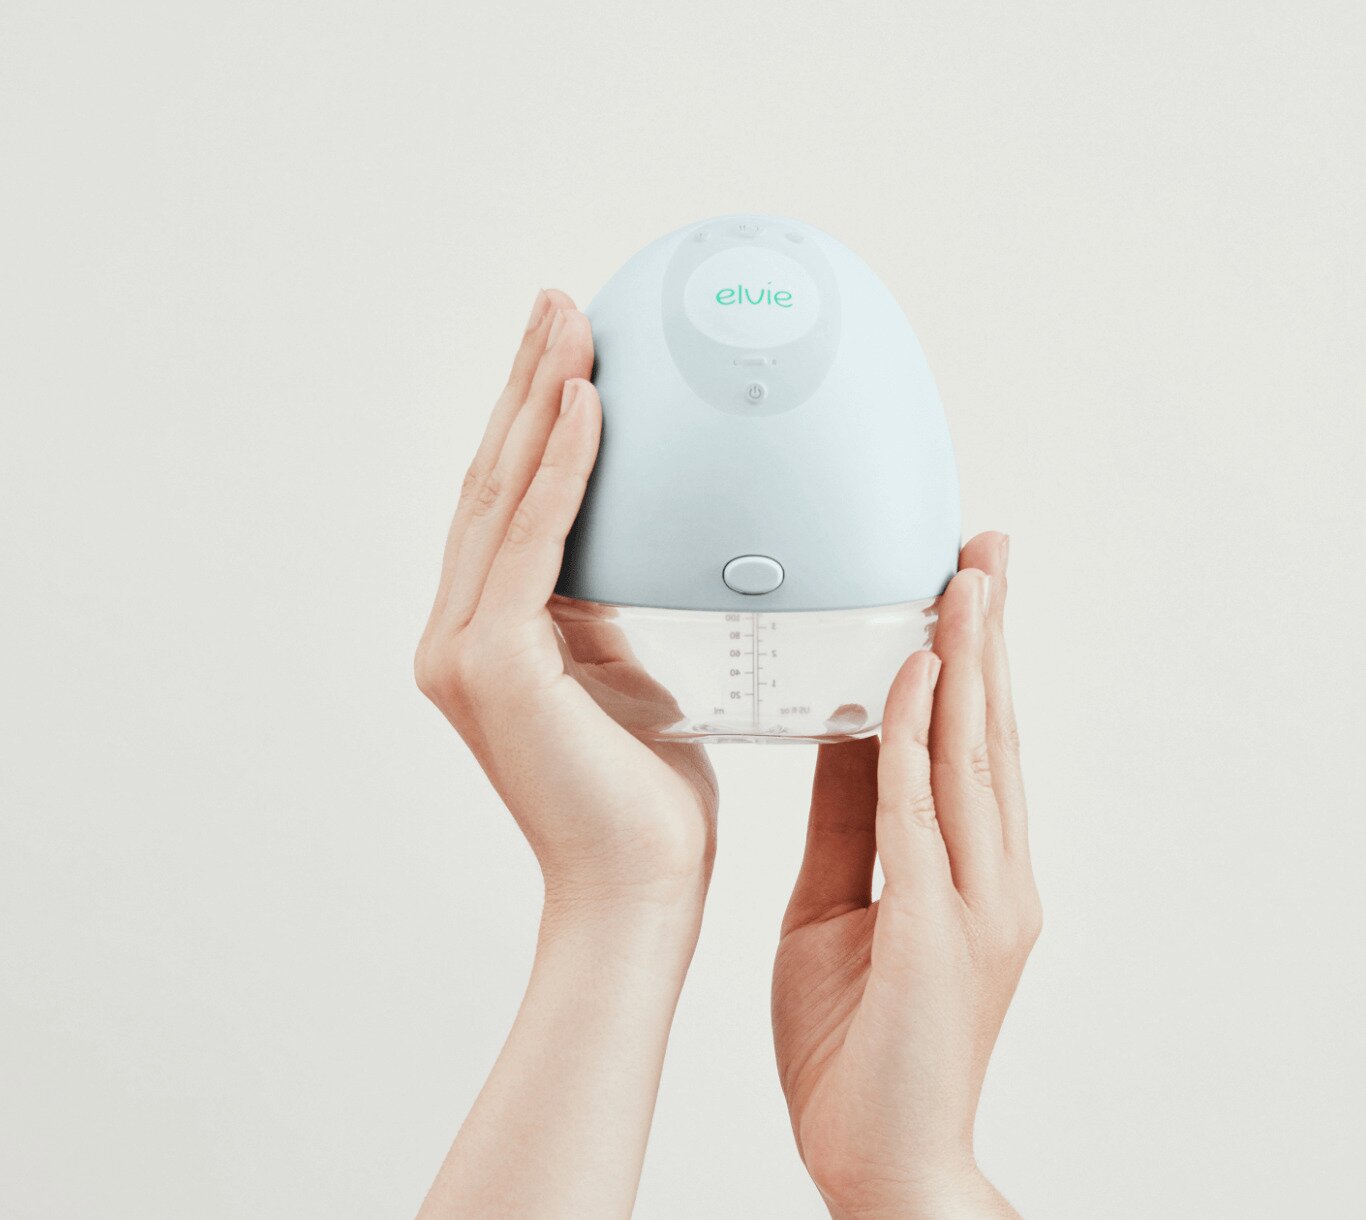 Elvie wearable breast pump review! This is EXPENSIVE…. And not worth t